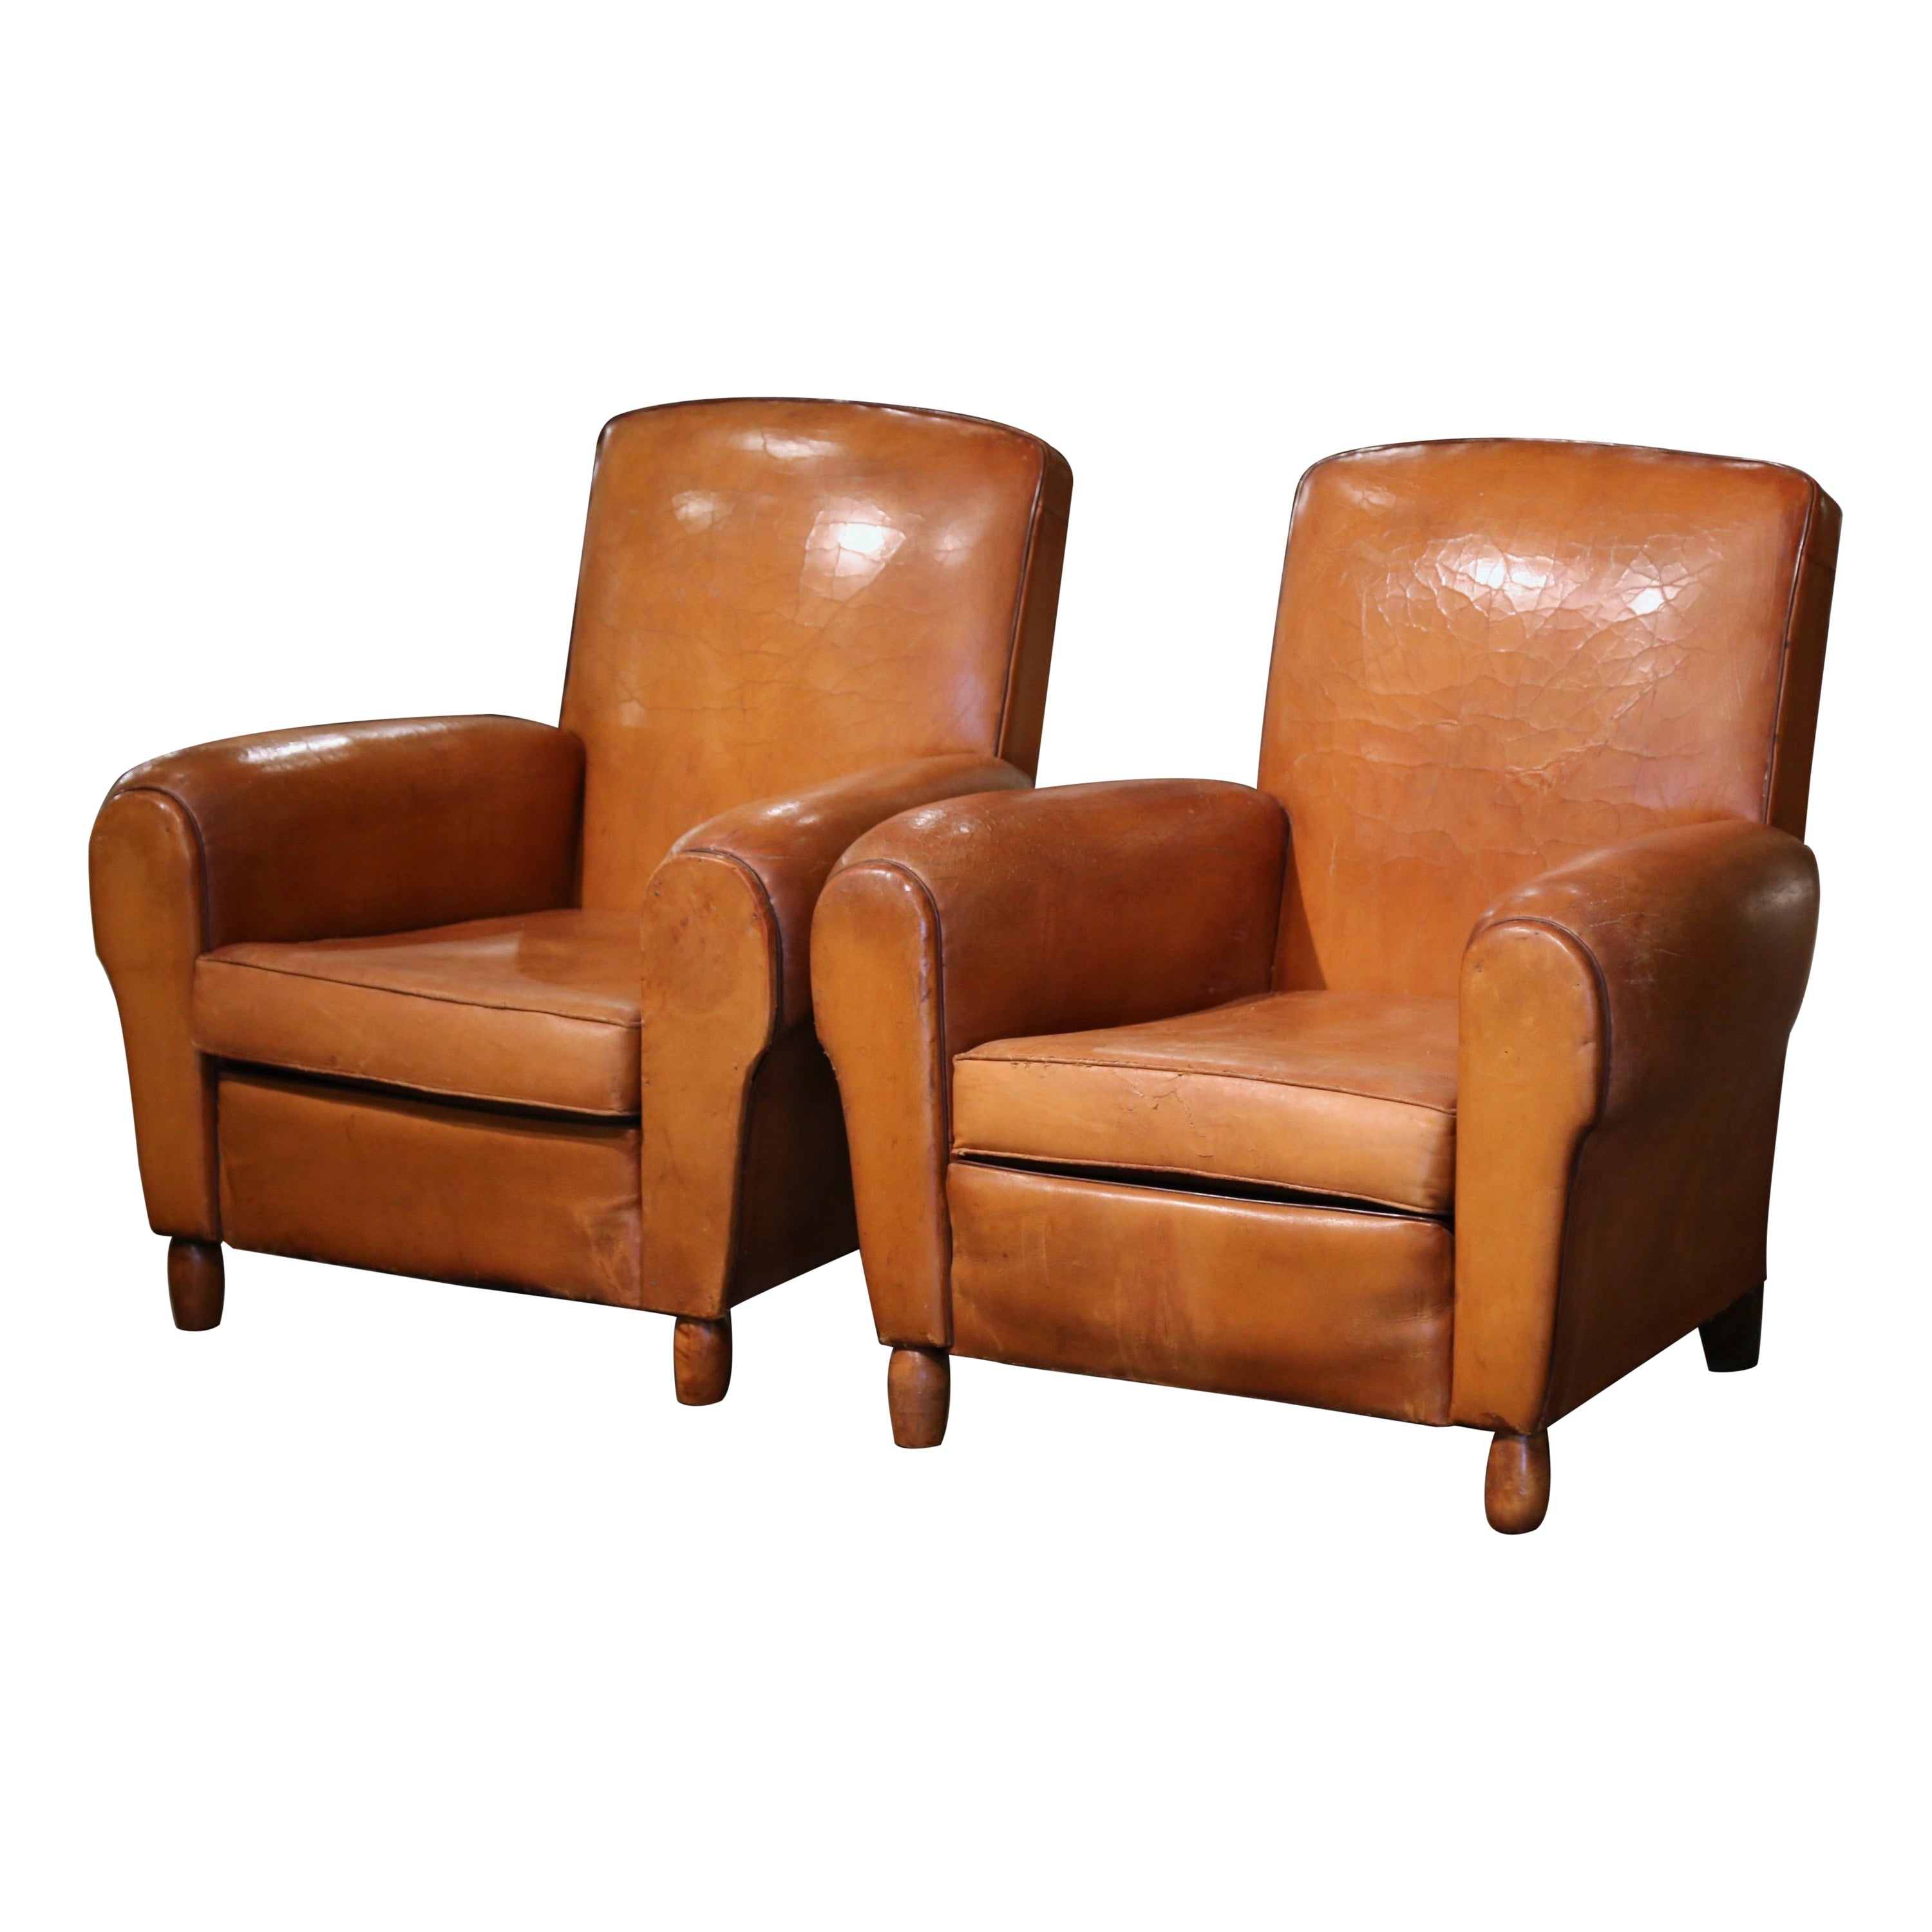 Pair of Early 20th Century French Club Armchairs with Original Tan Leather